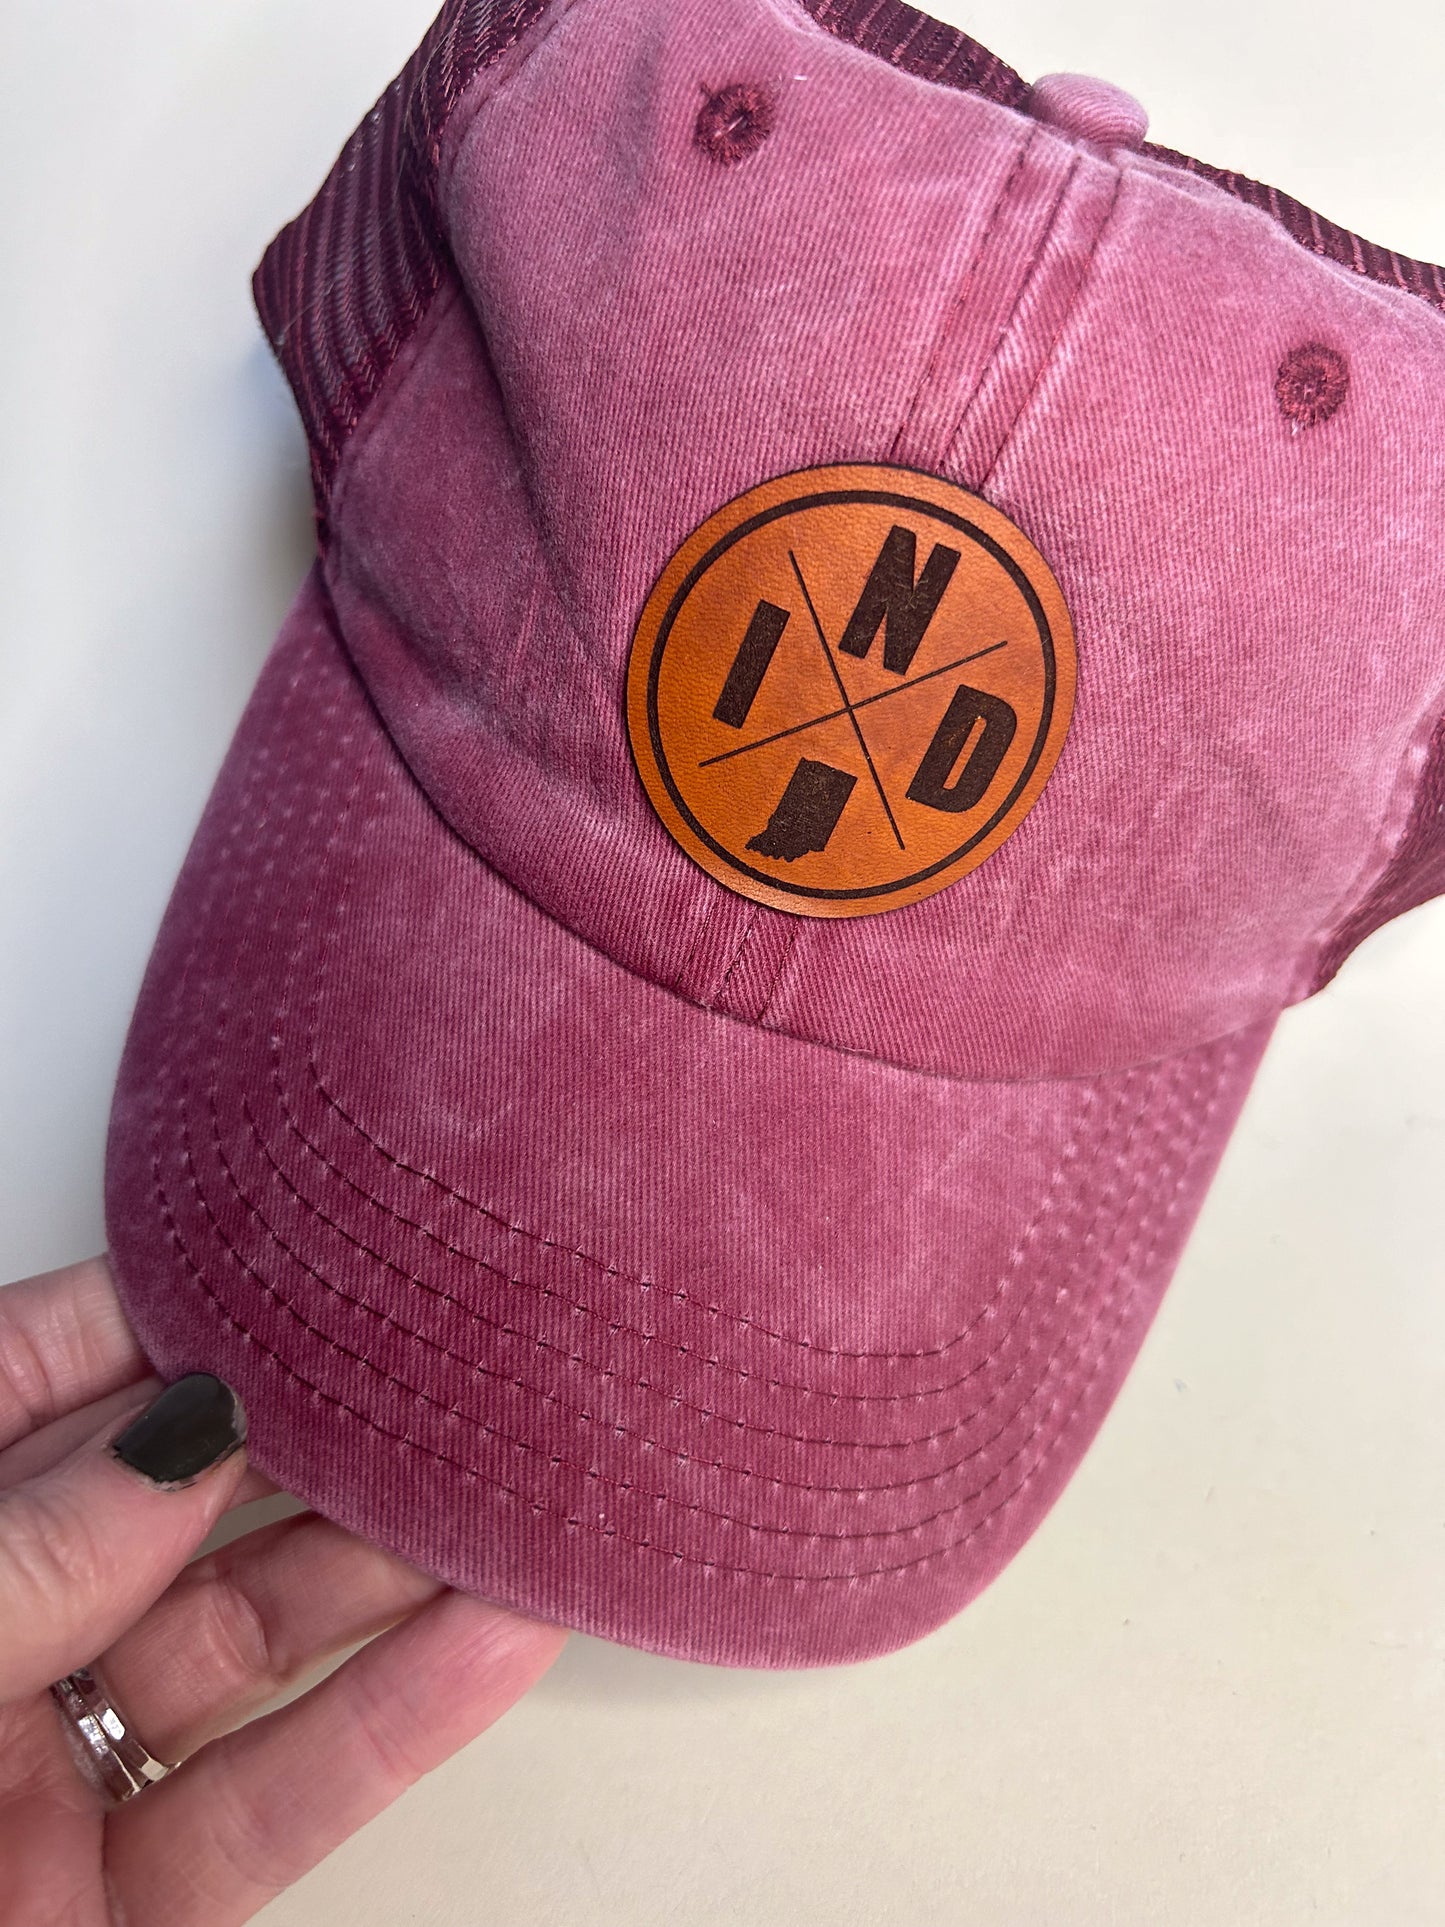 Circle IND Patch on Maroon Hat